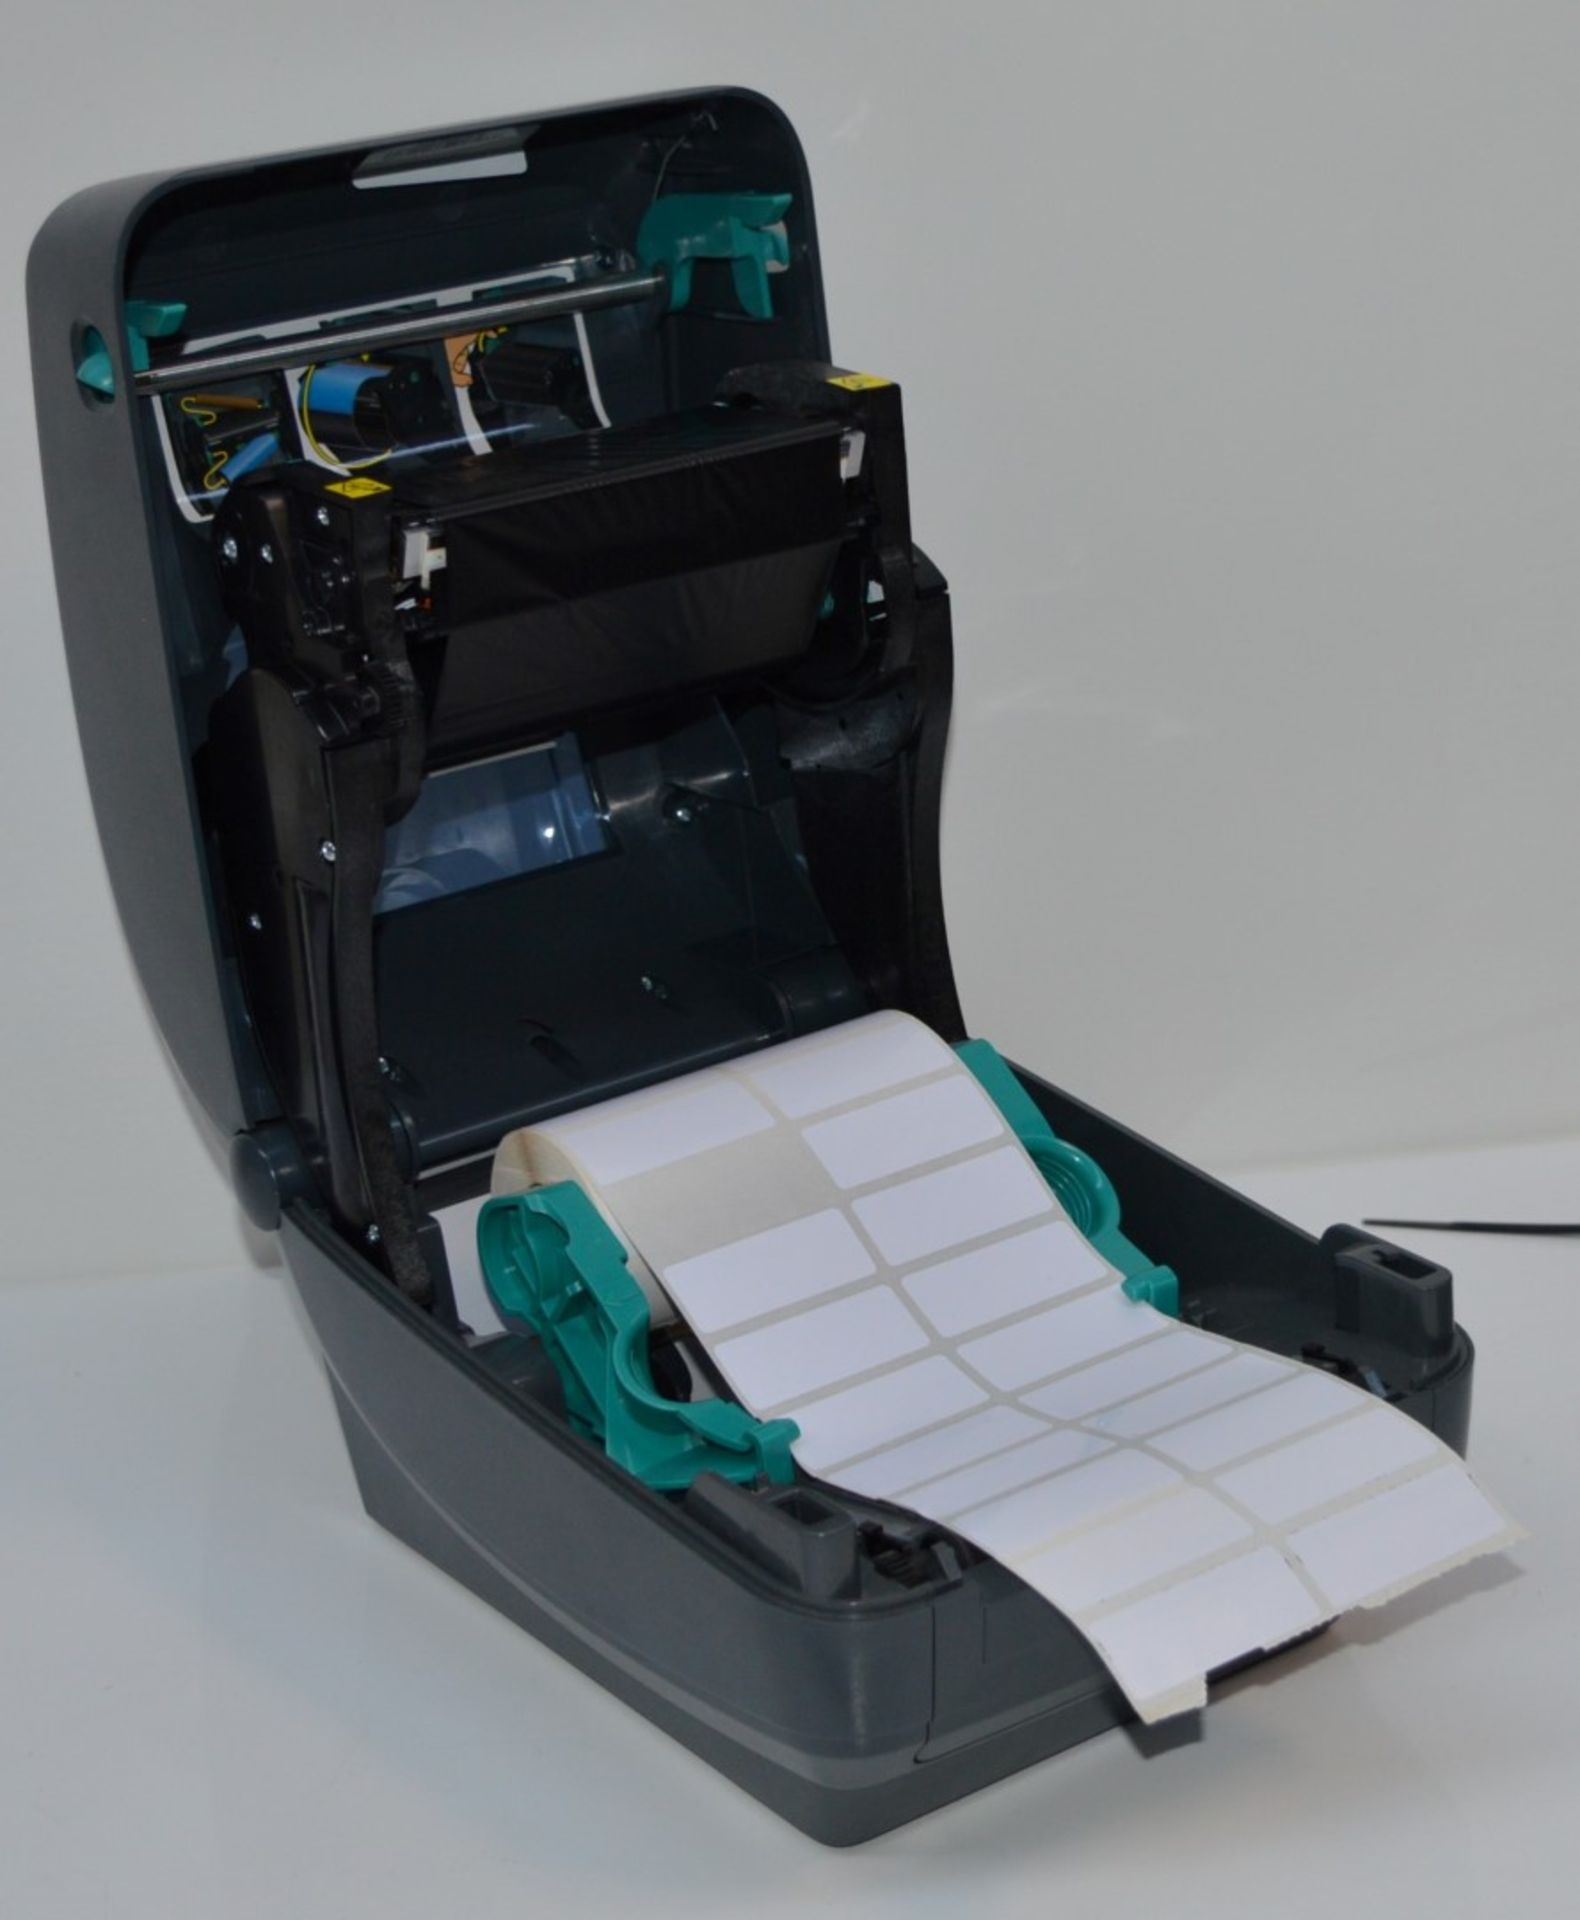 1 x Zebra GK420t Thermal Transfer Label Printer - USB & Serial Connectivity - Includes Cables - - Image 10 of 10